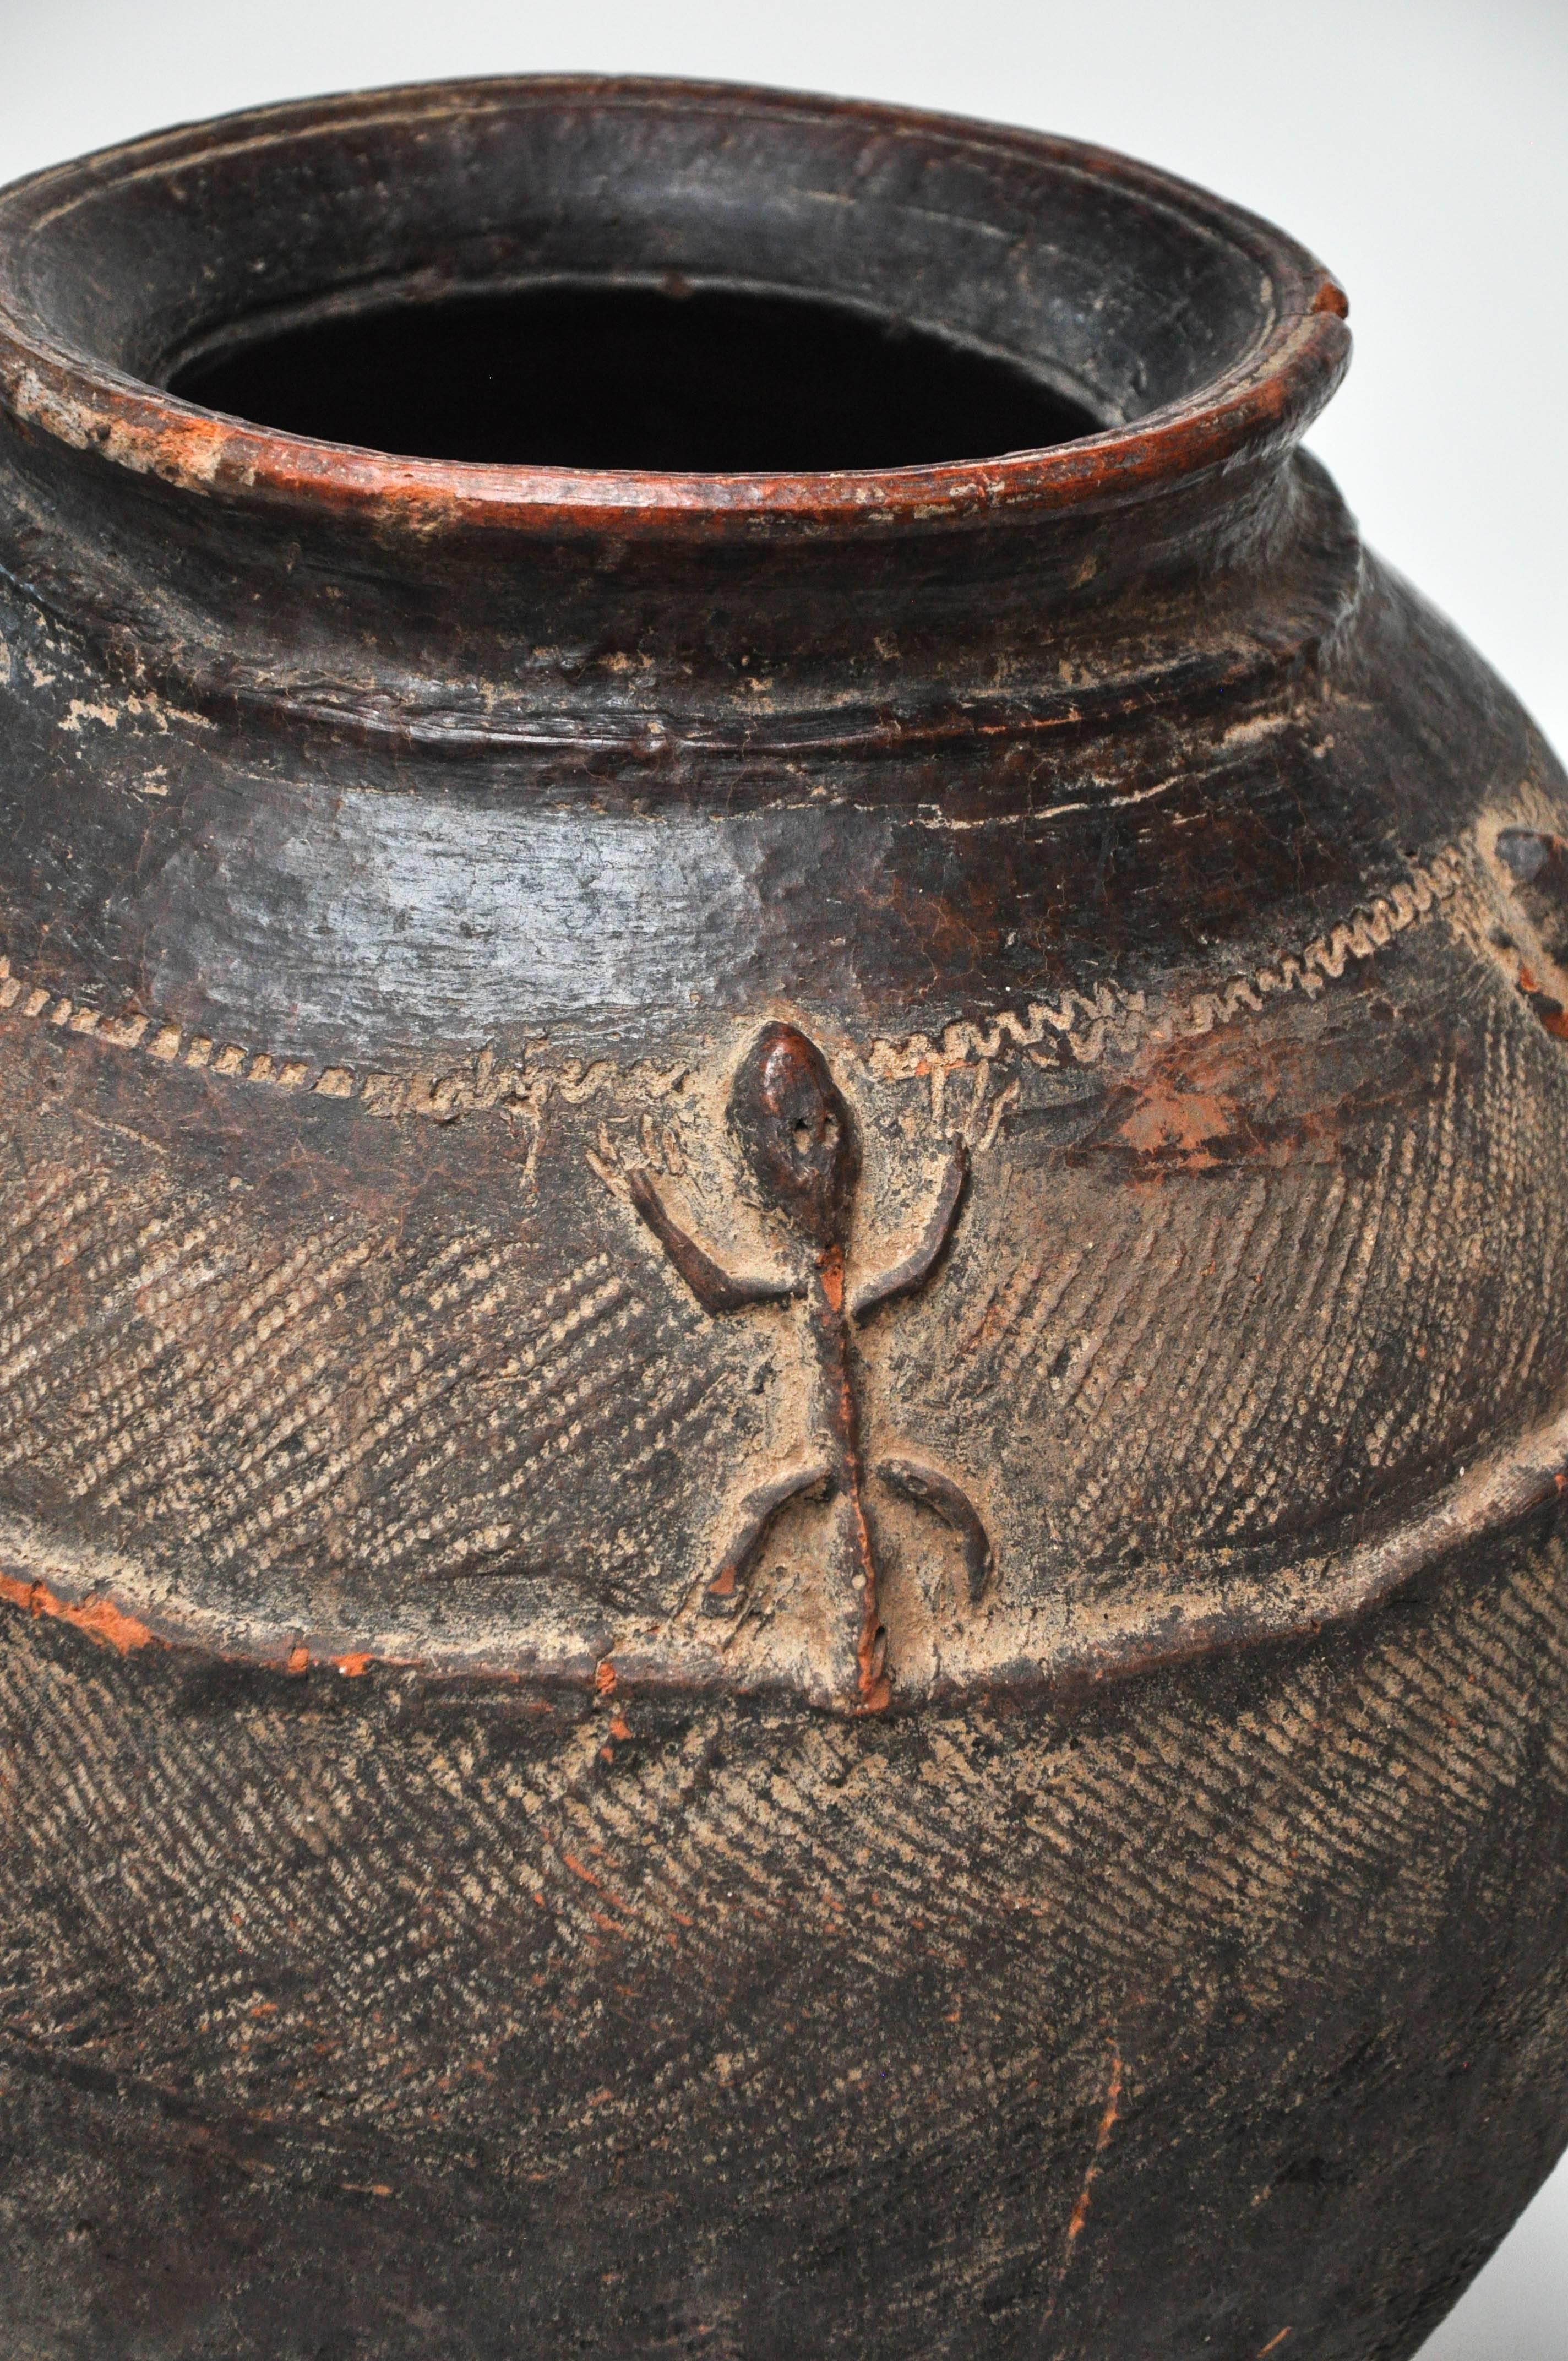 19th century African red clay water pot. This piece is from Mali. This generous size pot features textured and raised detailing and a beautiful patina

Dimensions: 16.5 diameter x 18.75